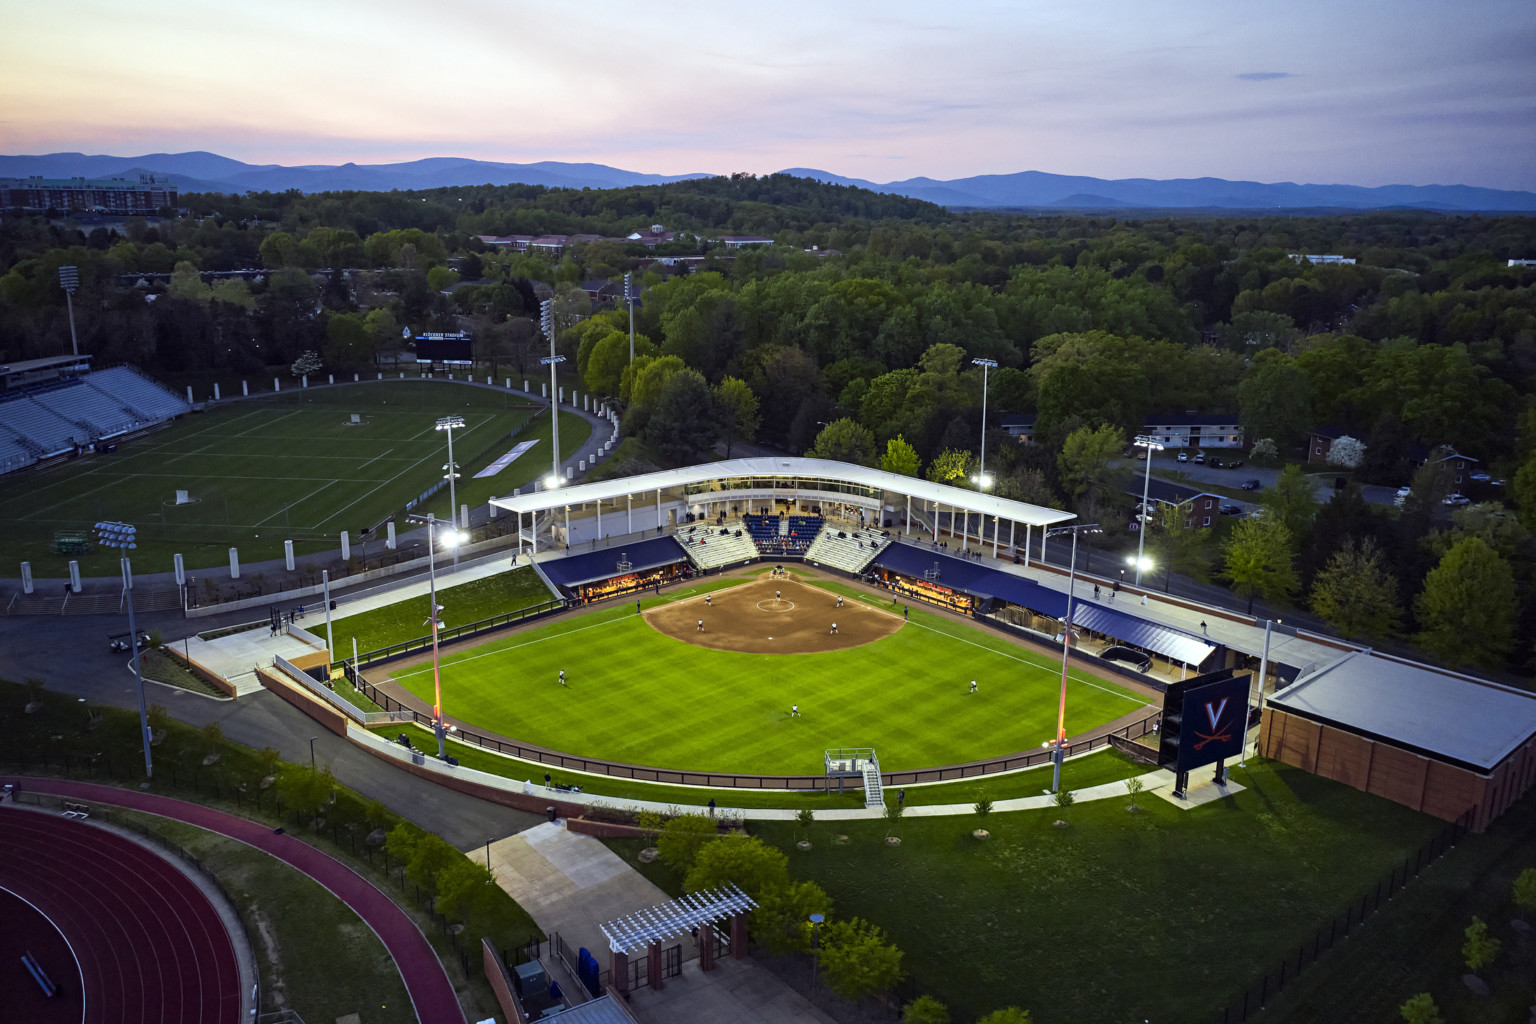 Aerial view of softball stadium at dusk lit up but lights and surrounded by lush trees